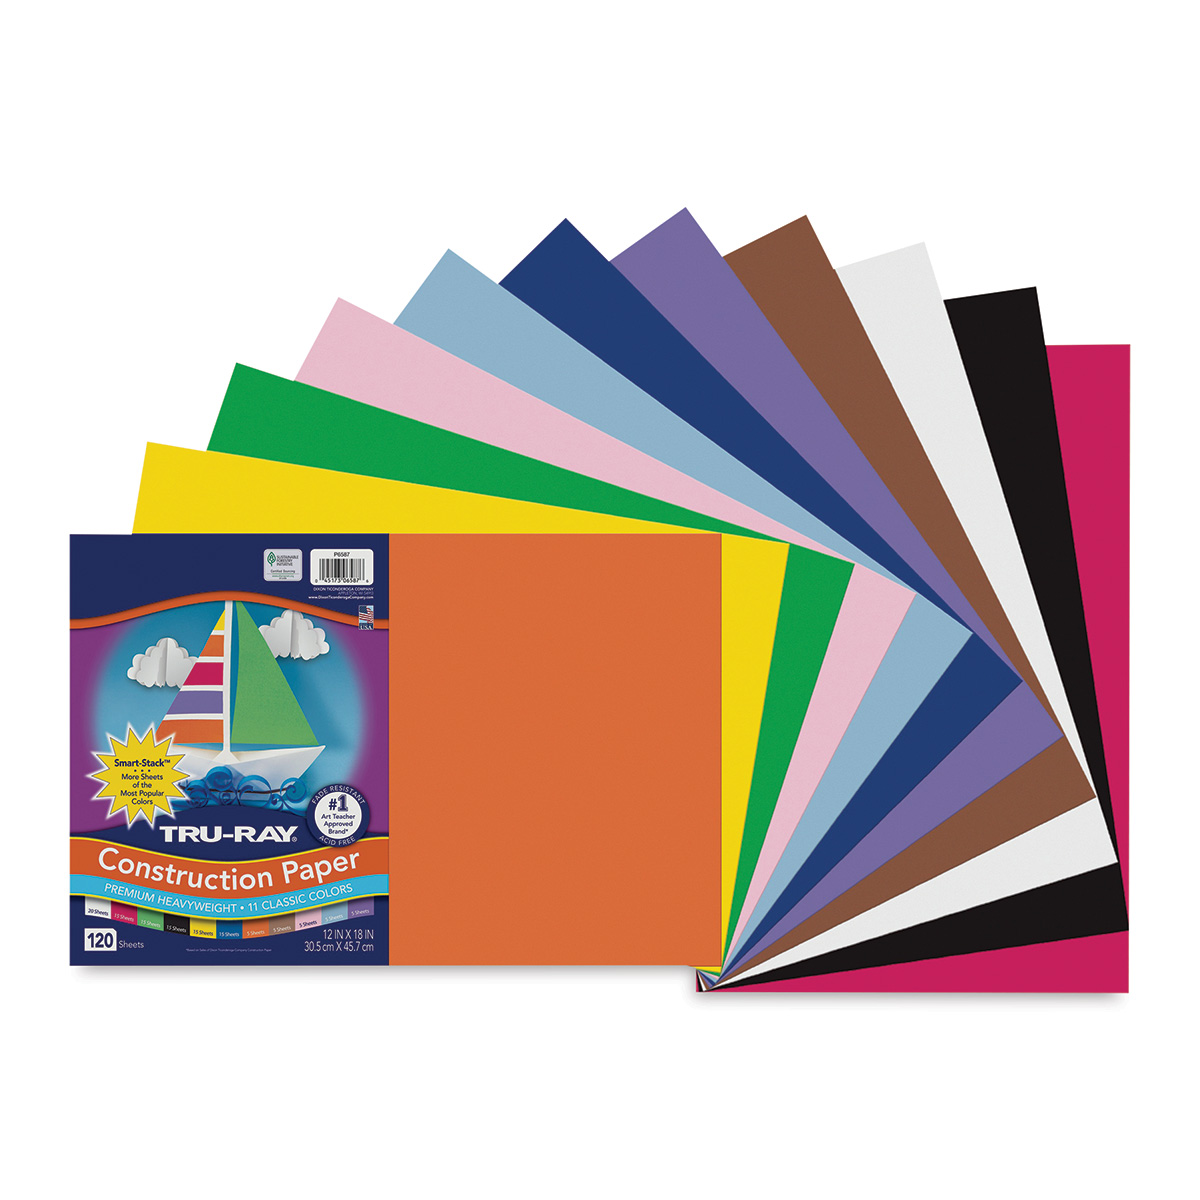 Pacon® PAC6596 Tru-Ray® Construction Paper 50 Sheets Hot Colors 9 x 12 